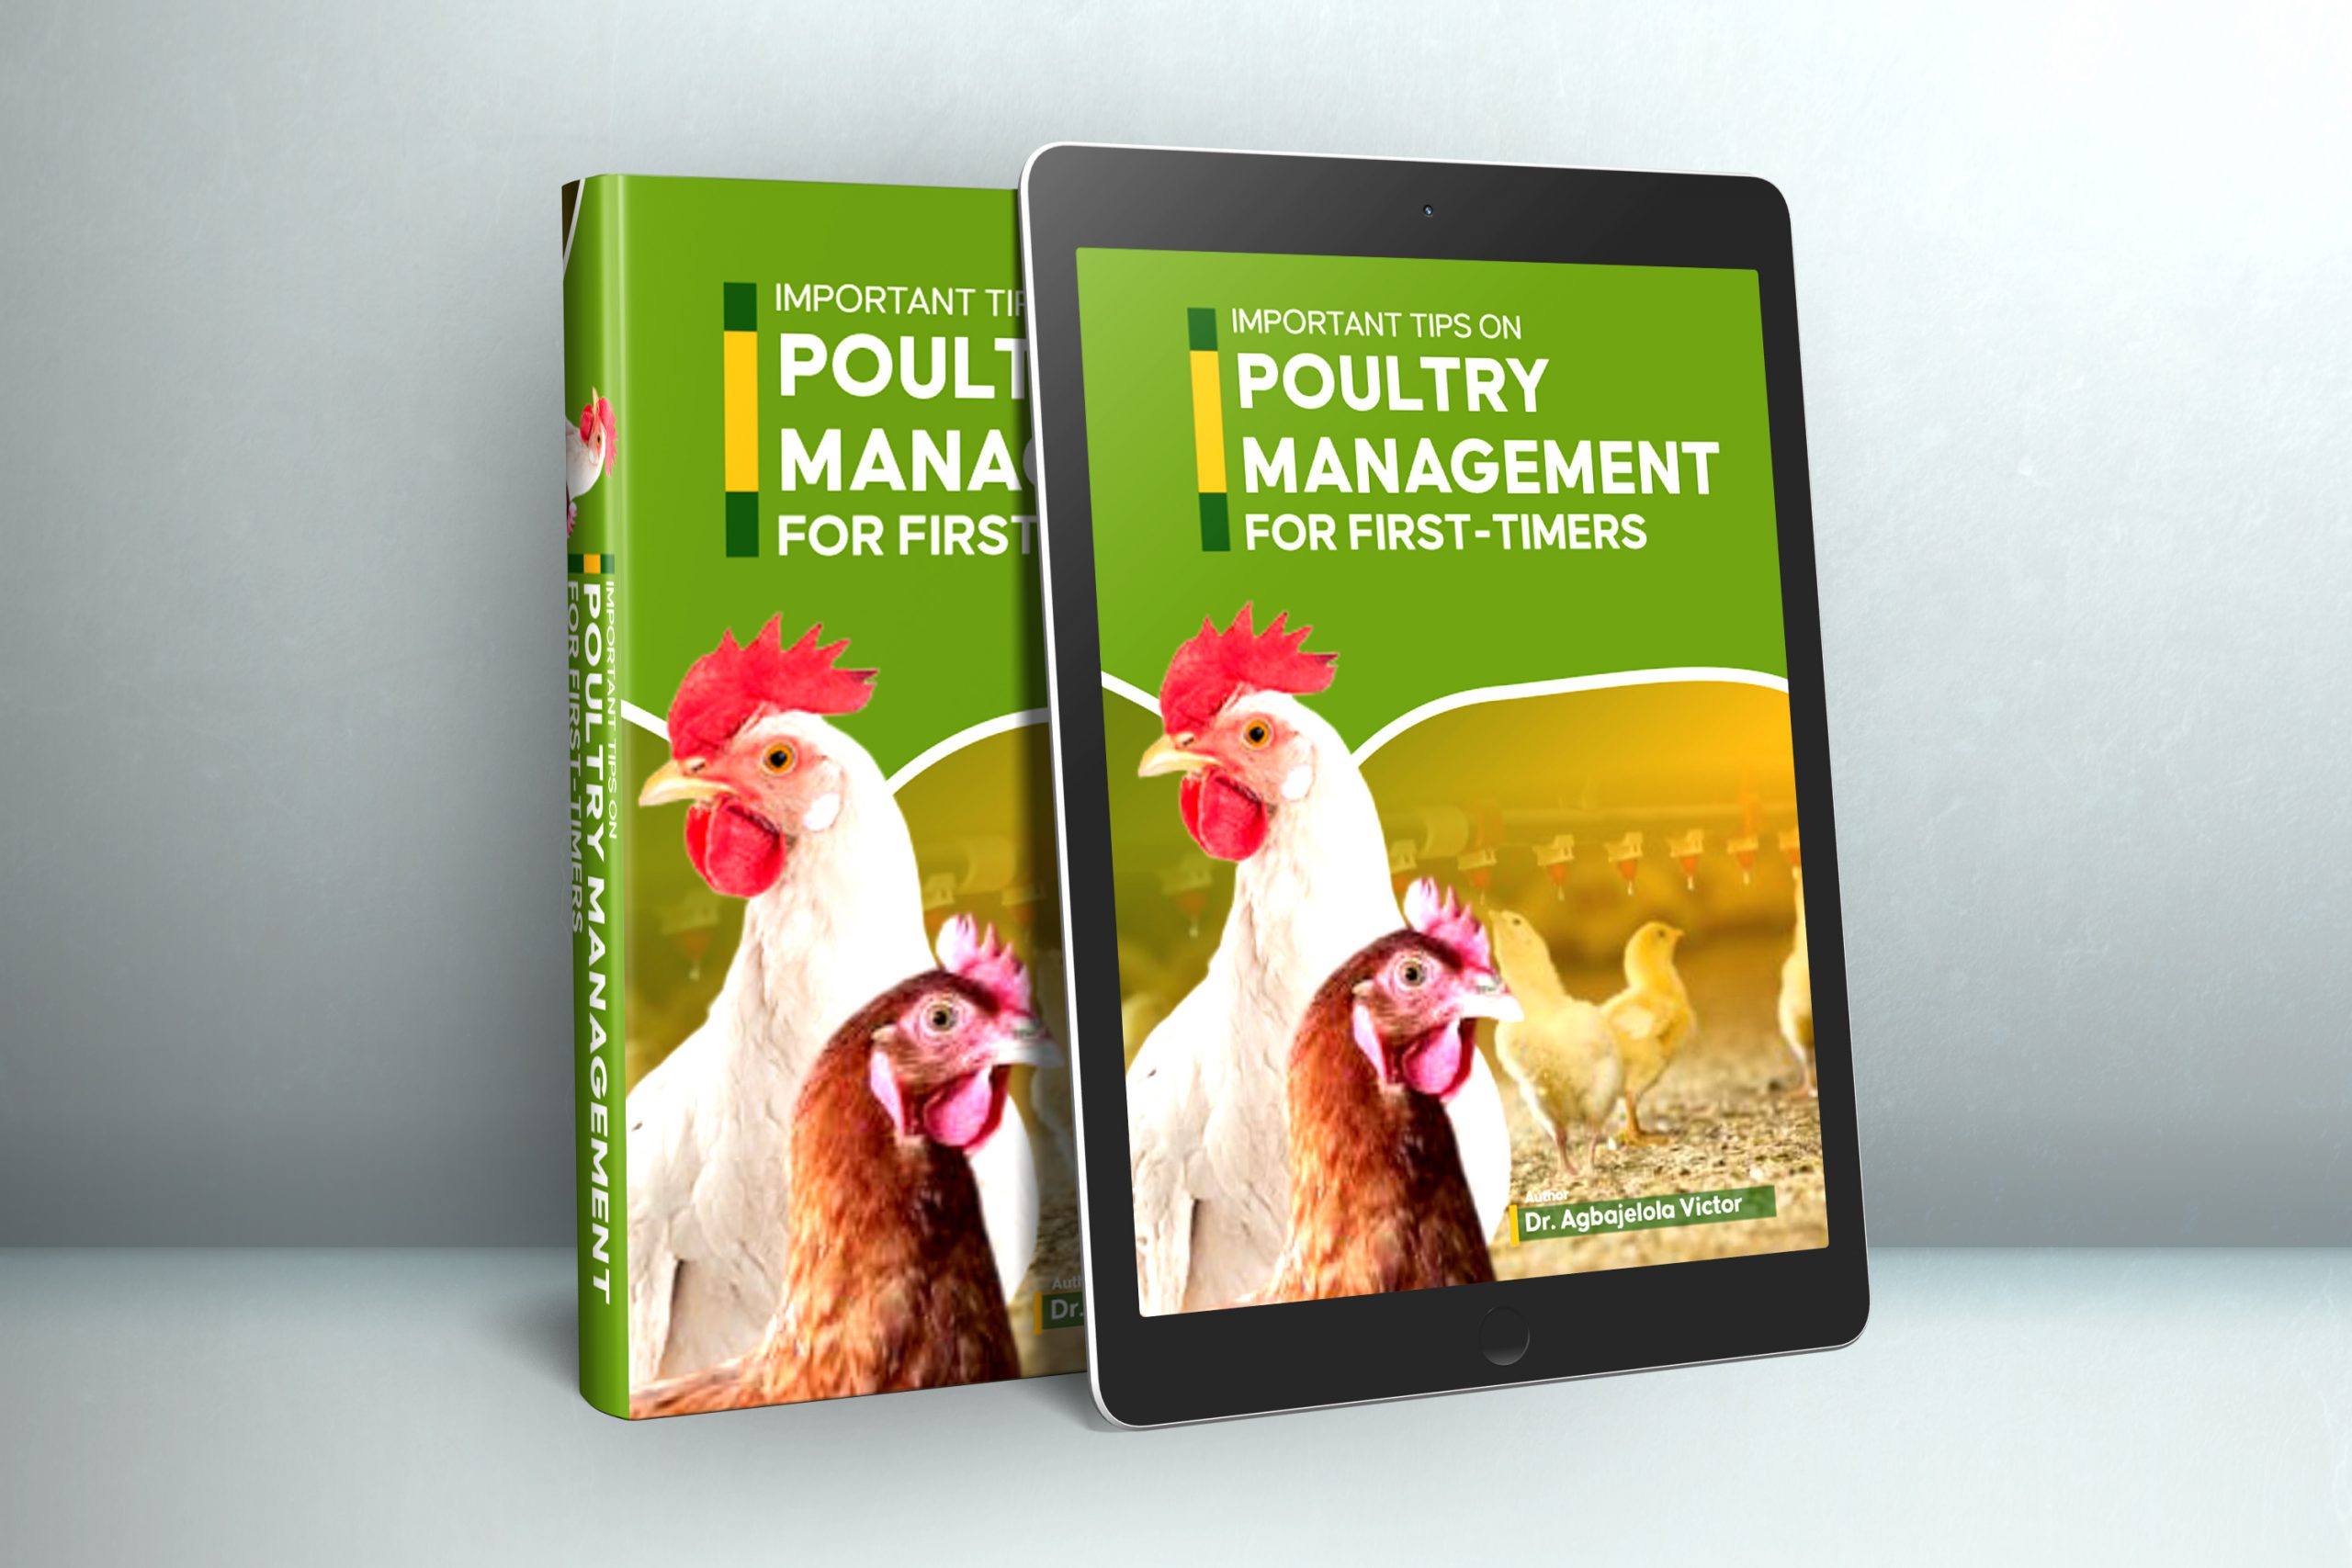 Poultry Management For First-Timers (E-Book) - Afrimash.com - Nigeria